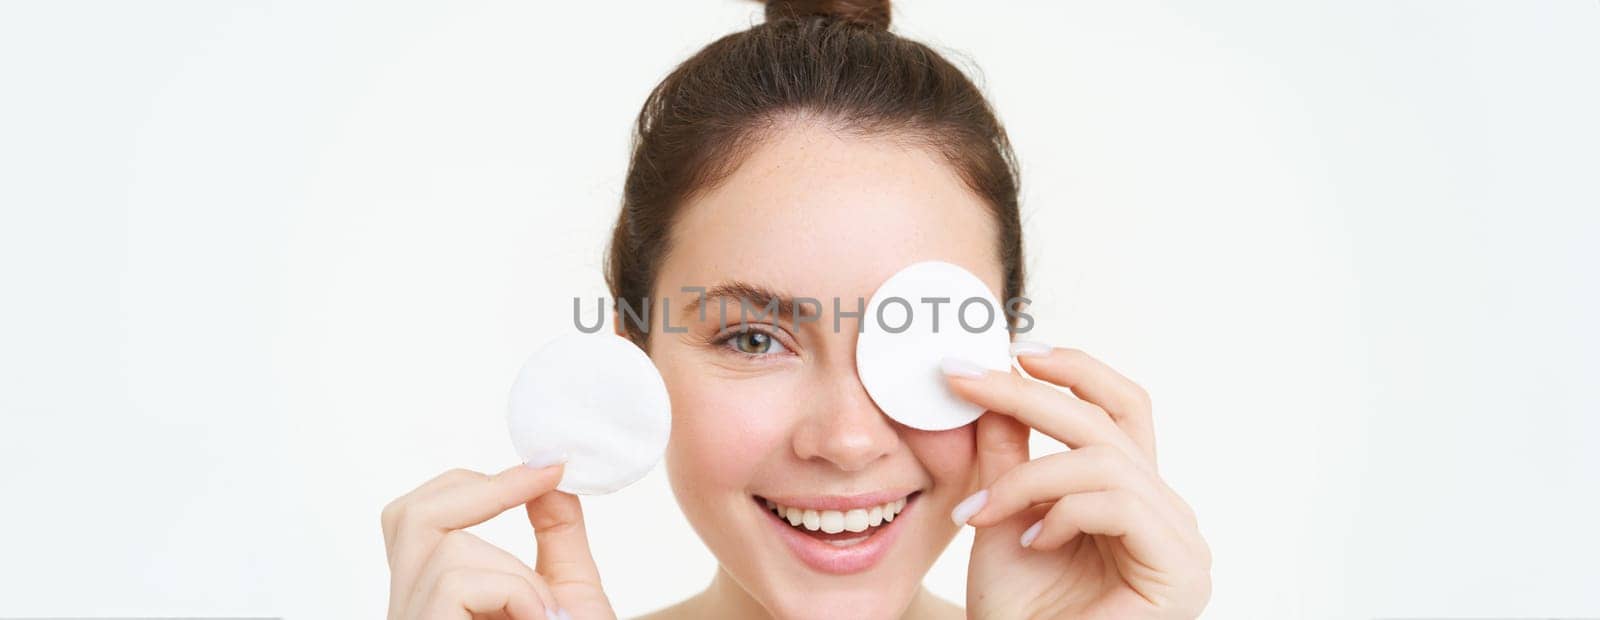 Beauty and female concept. Close up portrait, young woman holding cotton cosmetic pads near her face and smiling, removes makeup, uses daily facial cleanser, stands over white background.